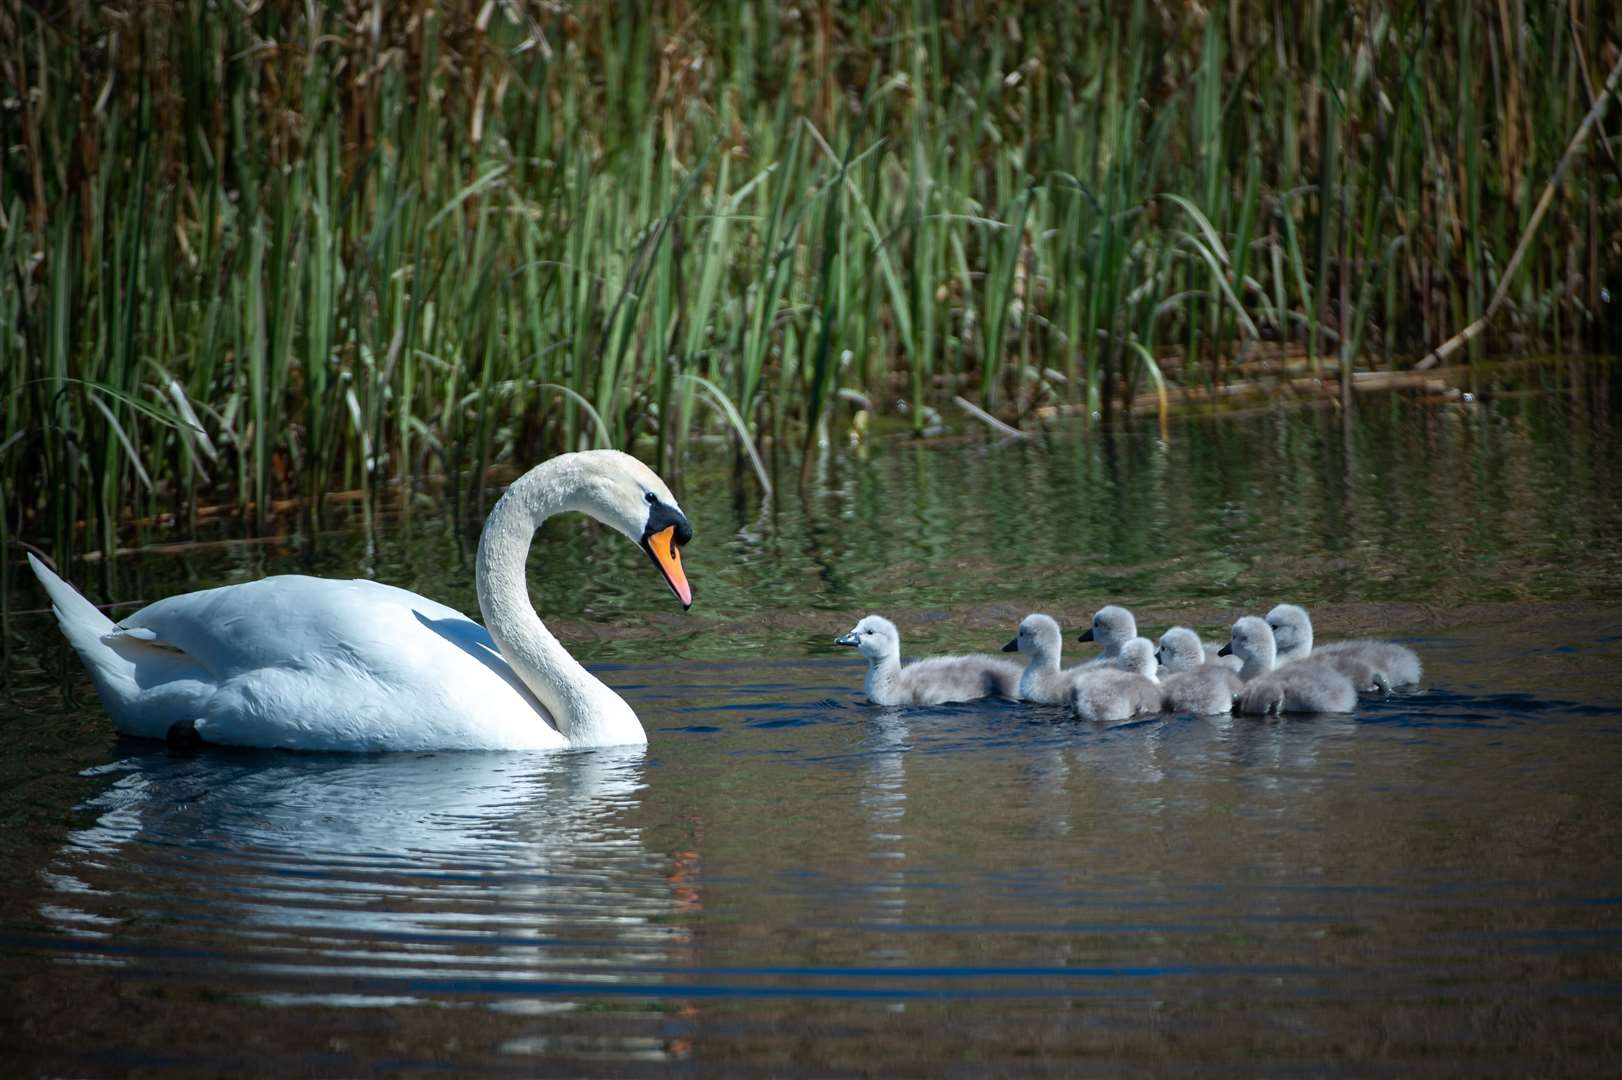 Swans at Inverness Campus earlier this year.